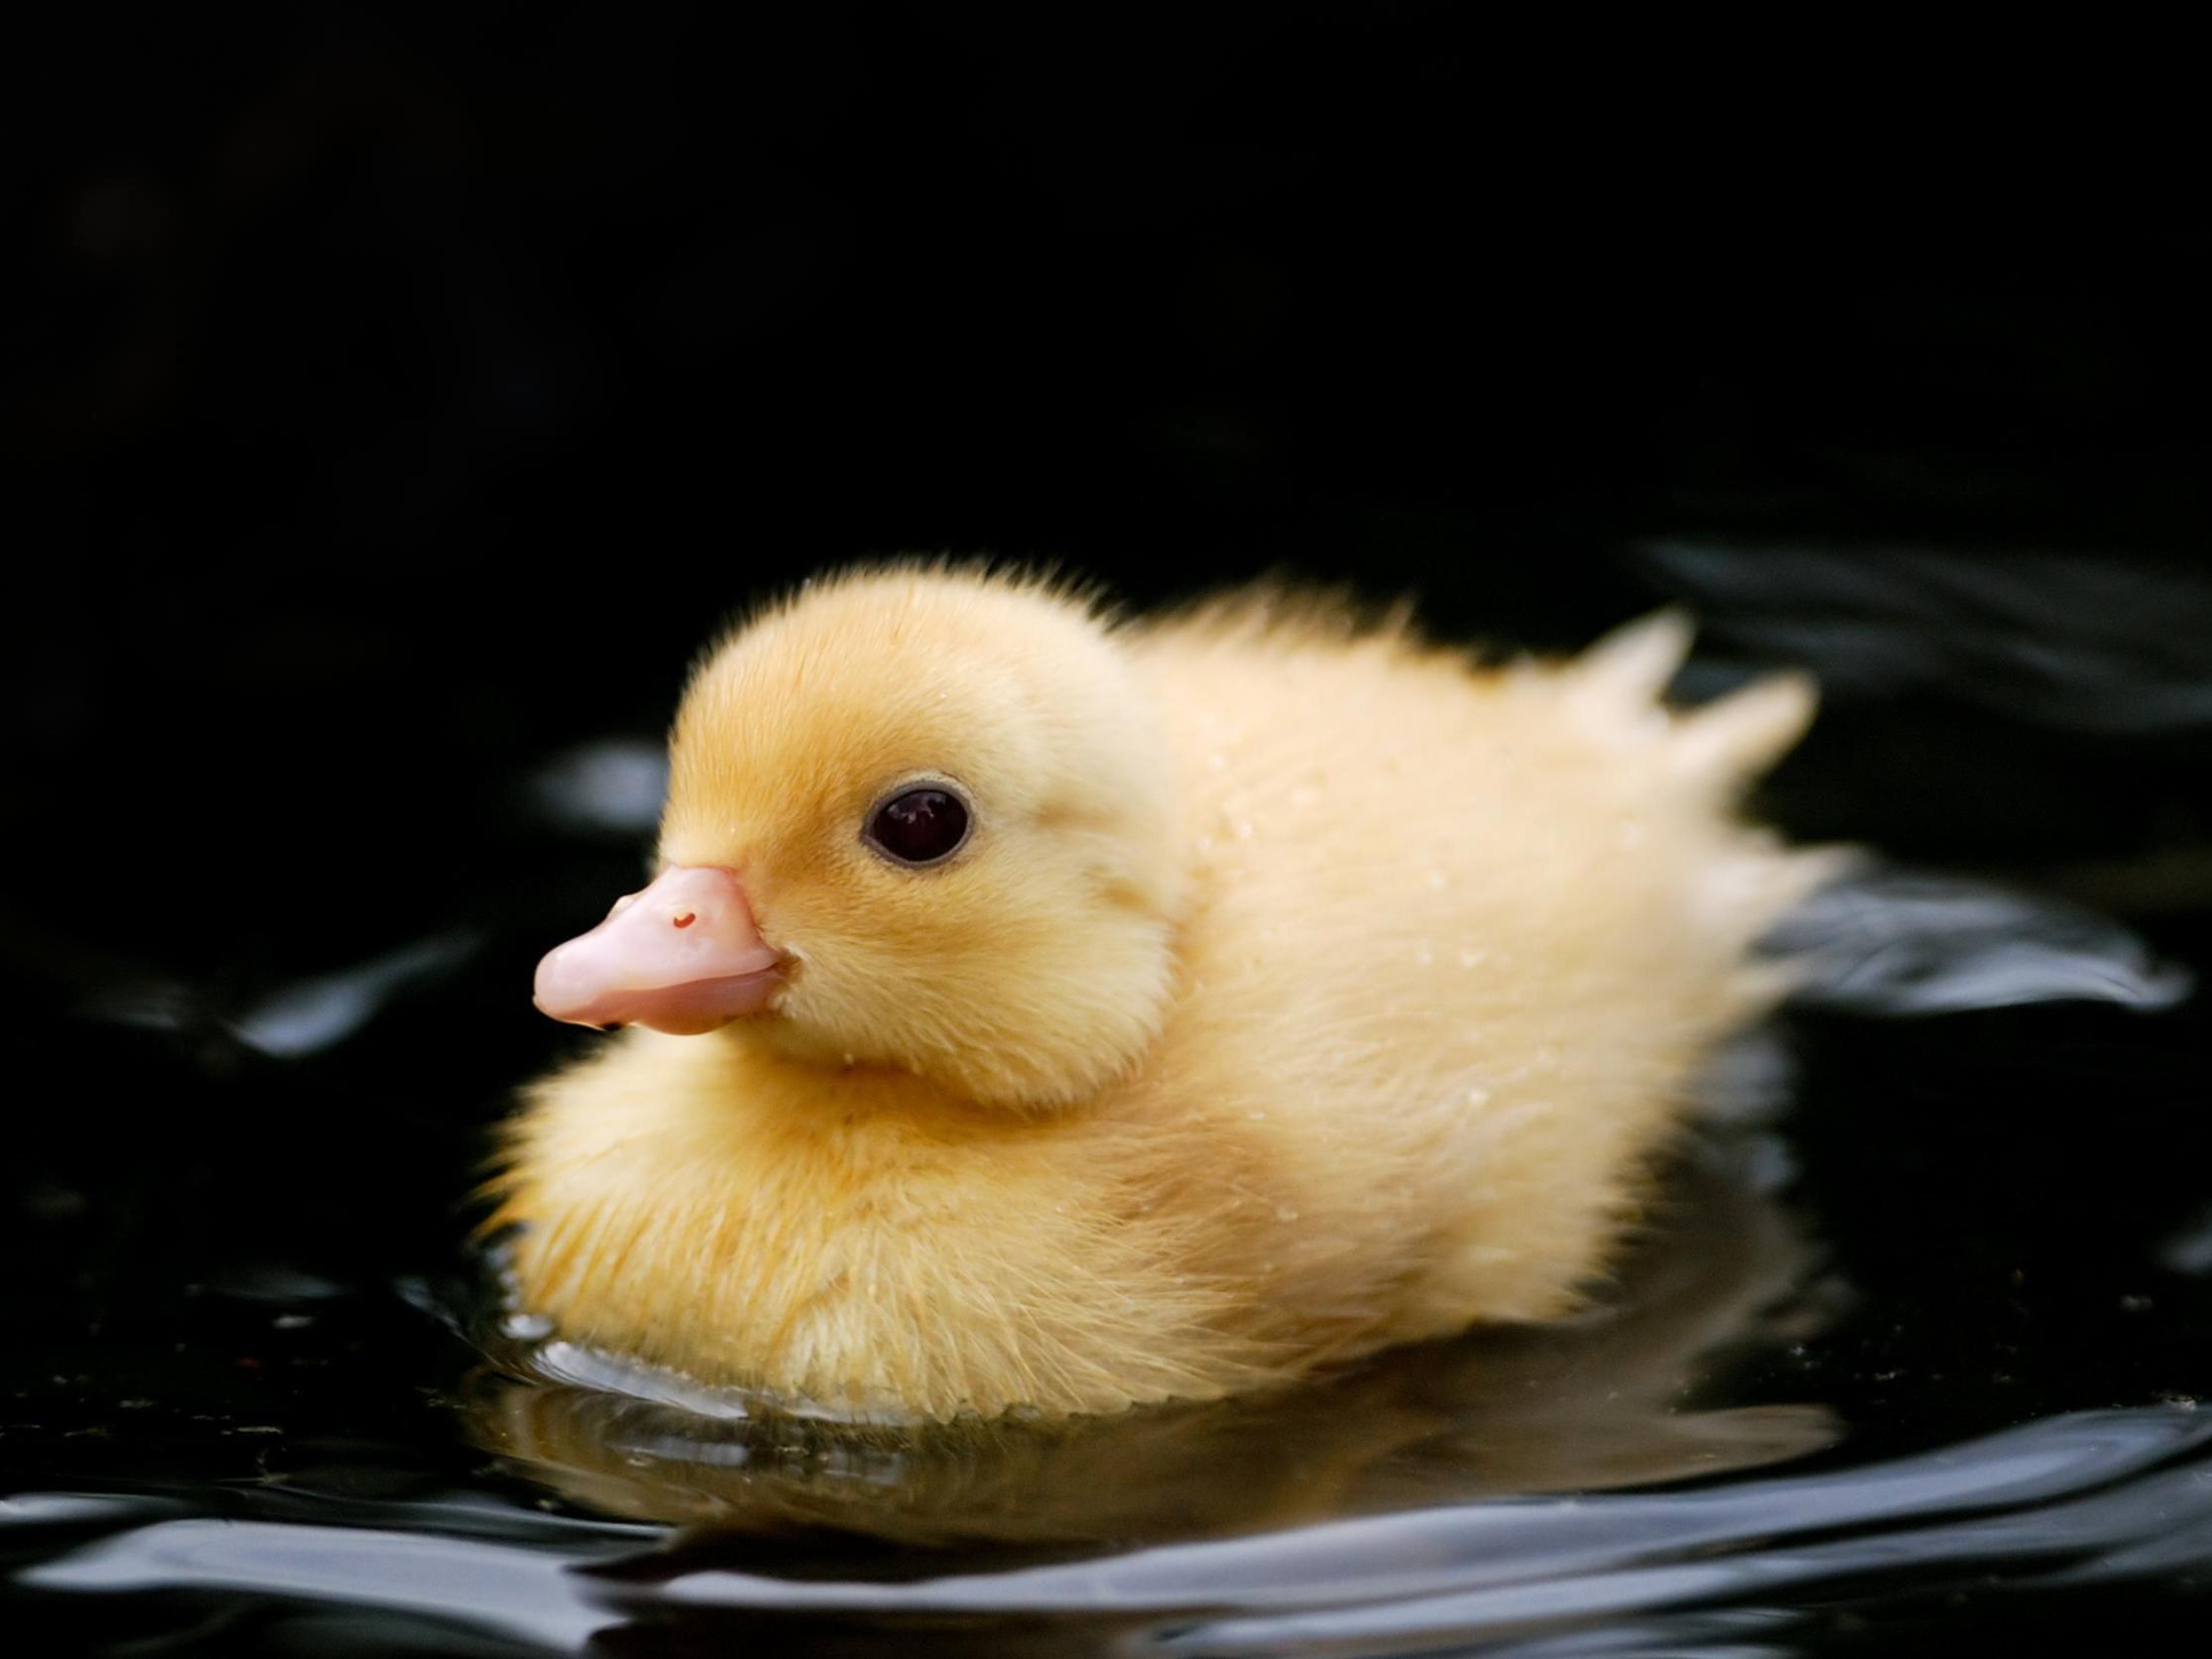 ‘It wandered off and I hope it’s okay. It was a beautiful little duck’